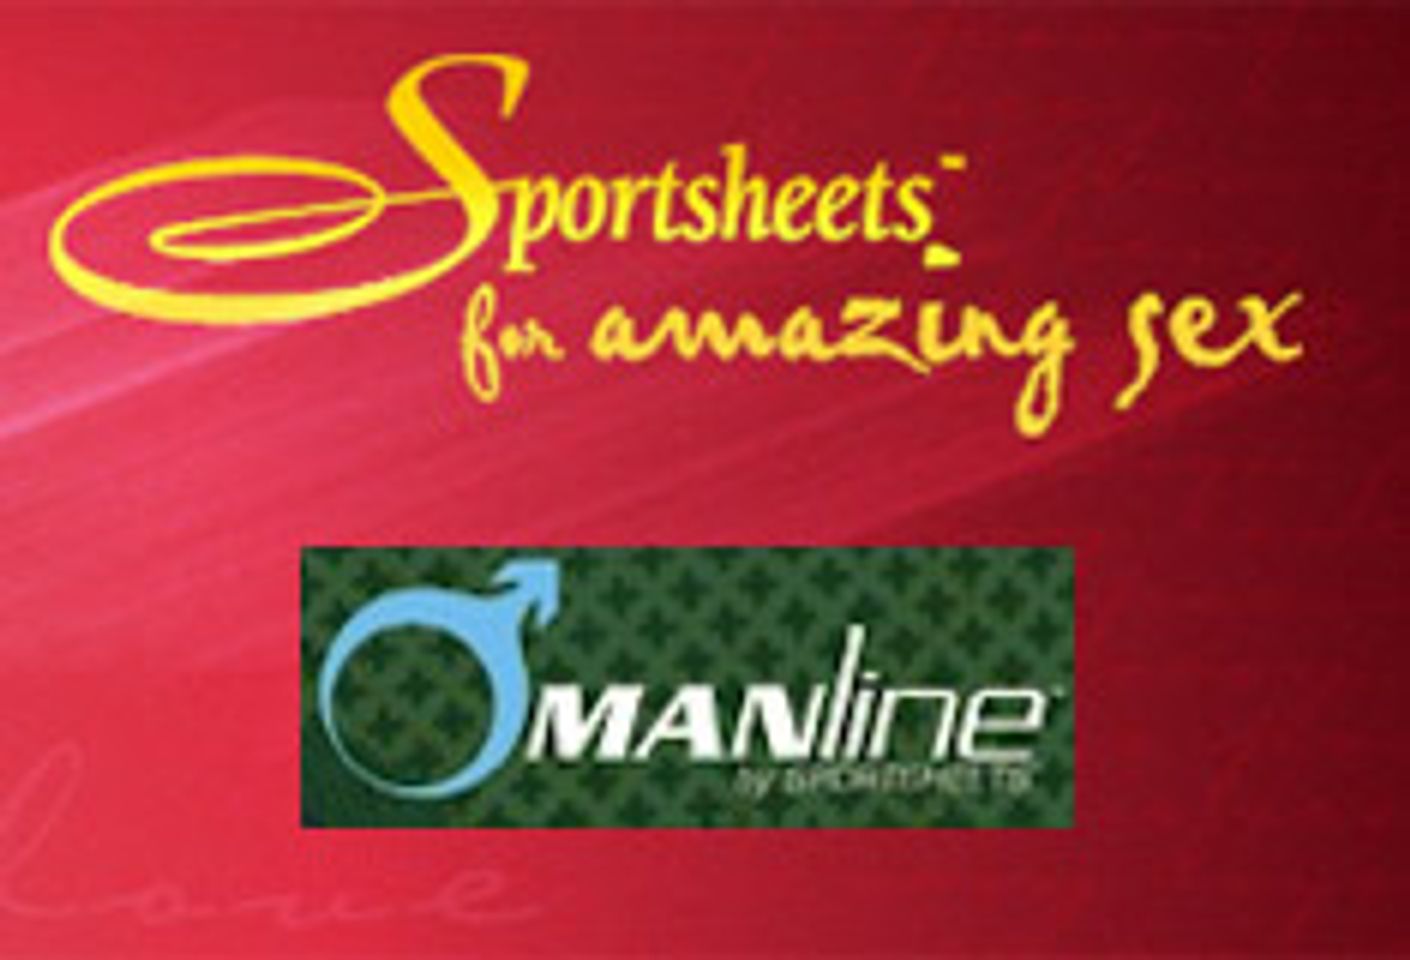 Company Profile: Manline by Sportsheets